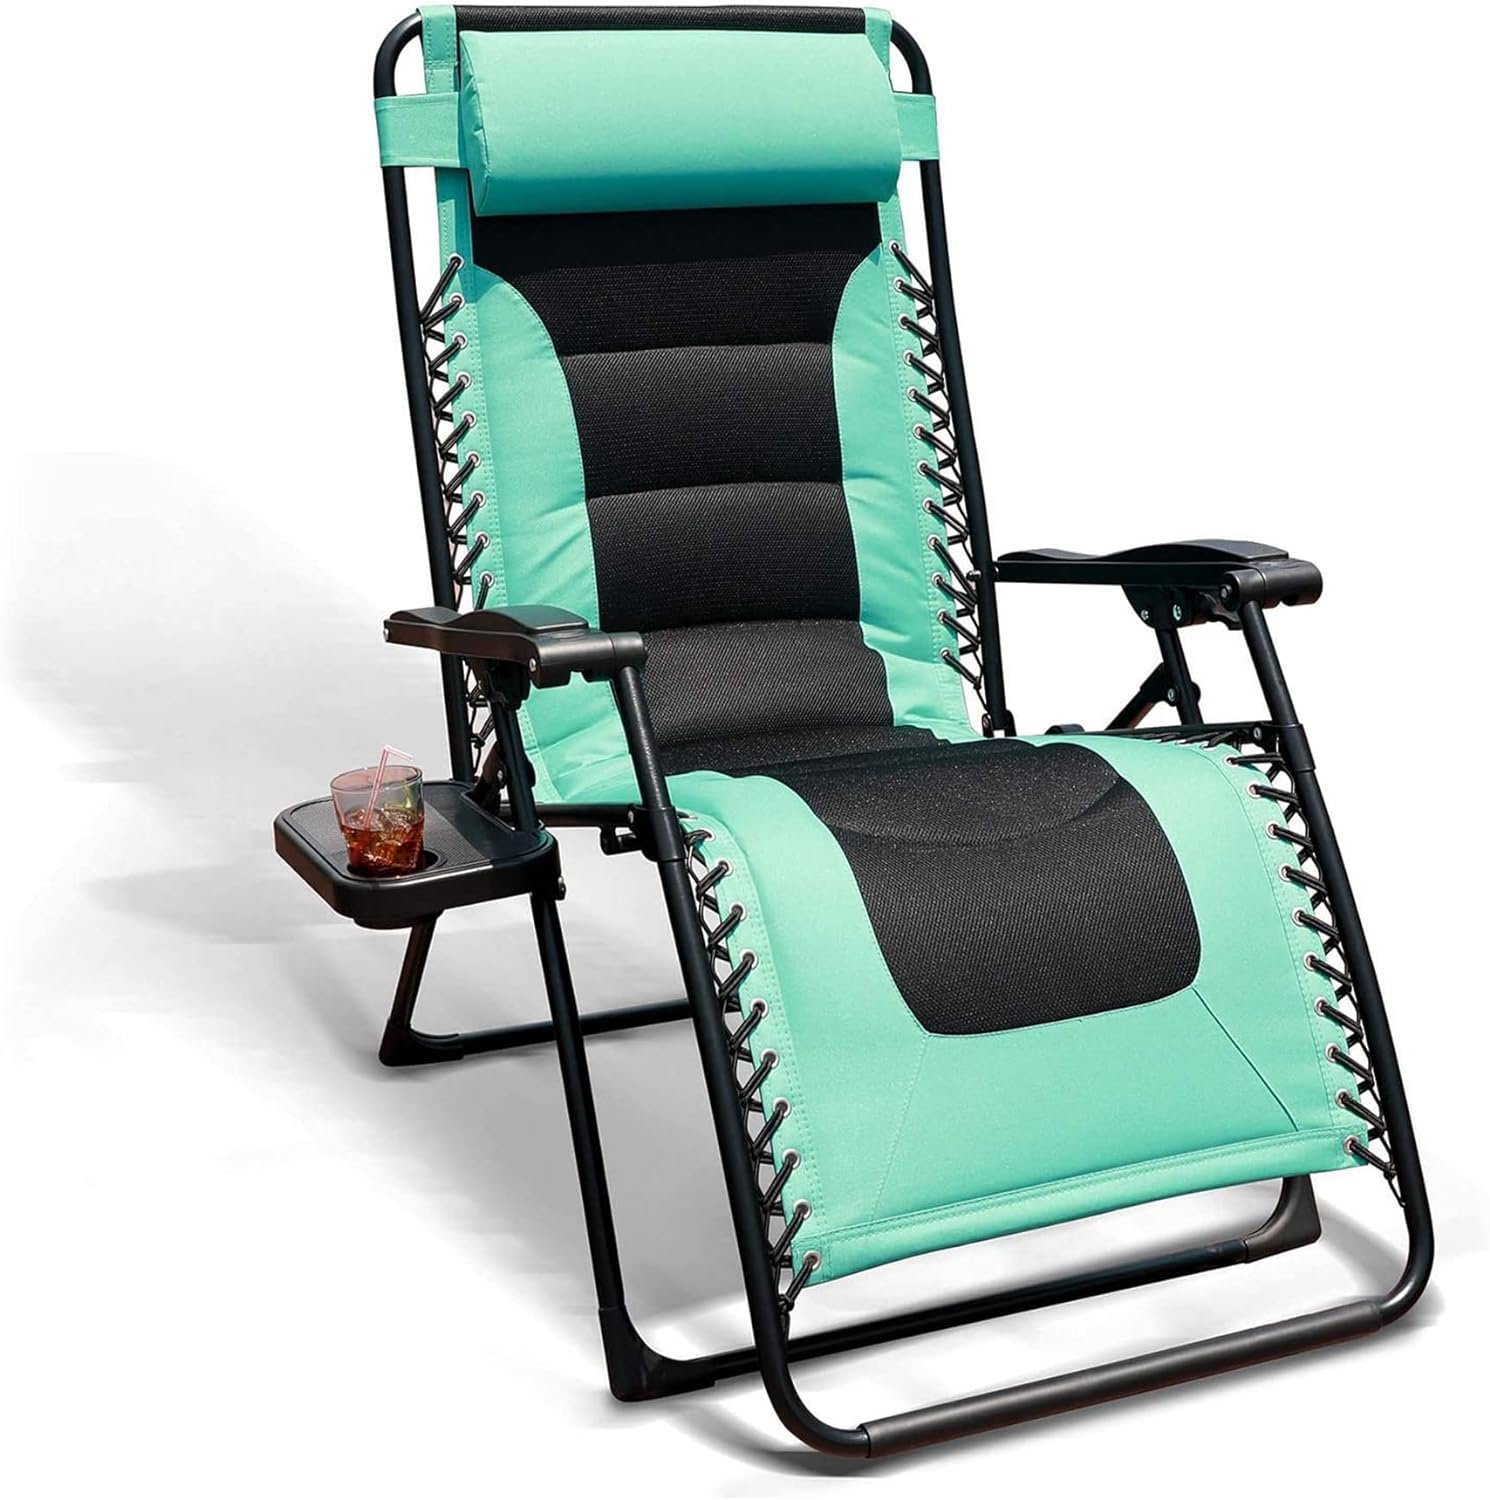 GOLDSUN Oversized Padded Zero Gravity Reclining Chair Adjustable Patio Lounge Chair with Cup Holder for Outdoor Beach Porch,Swimming Pool (Blue)